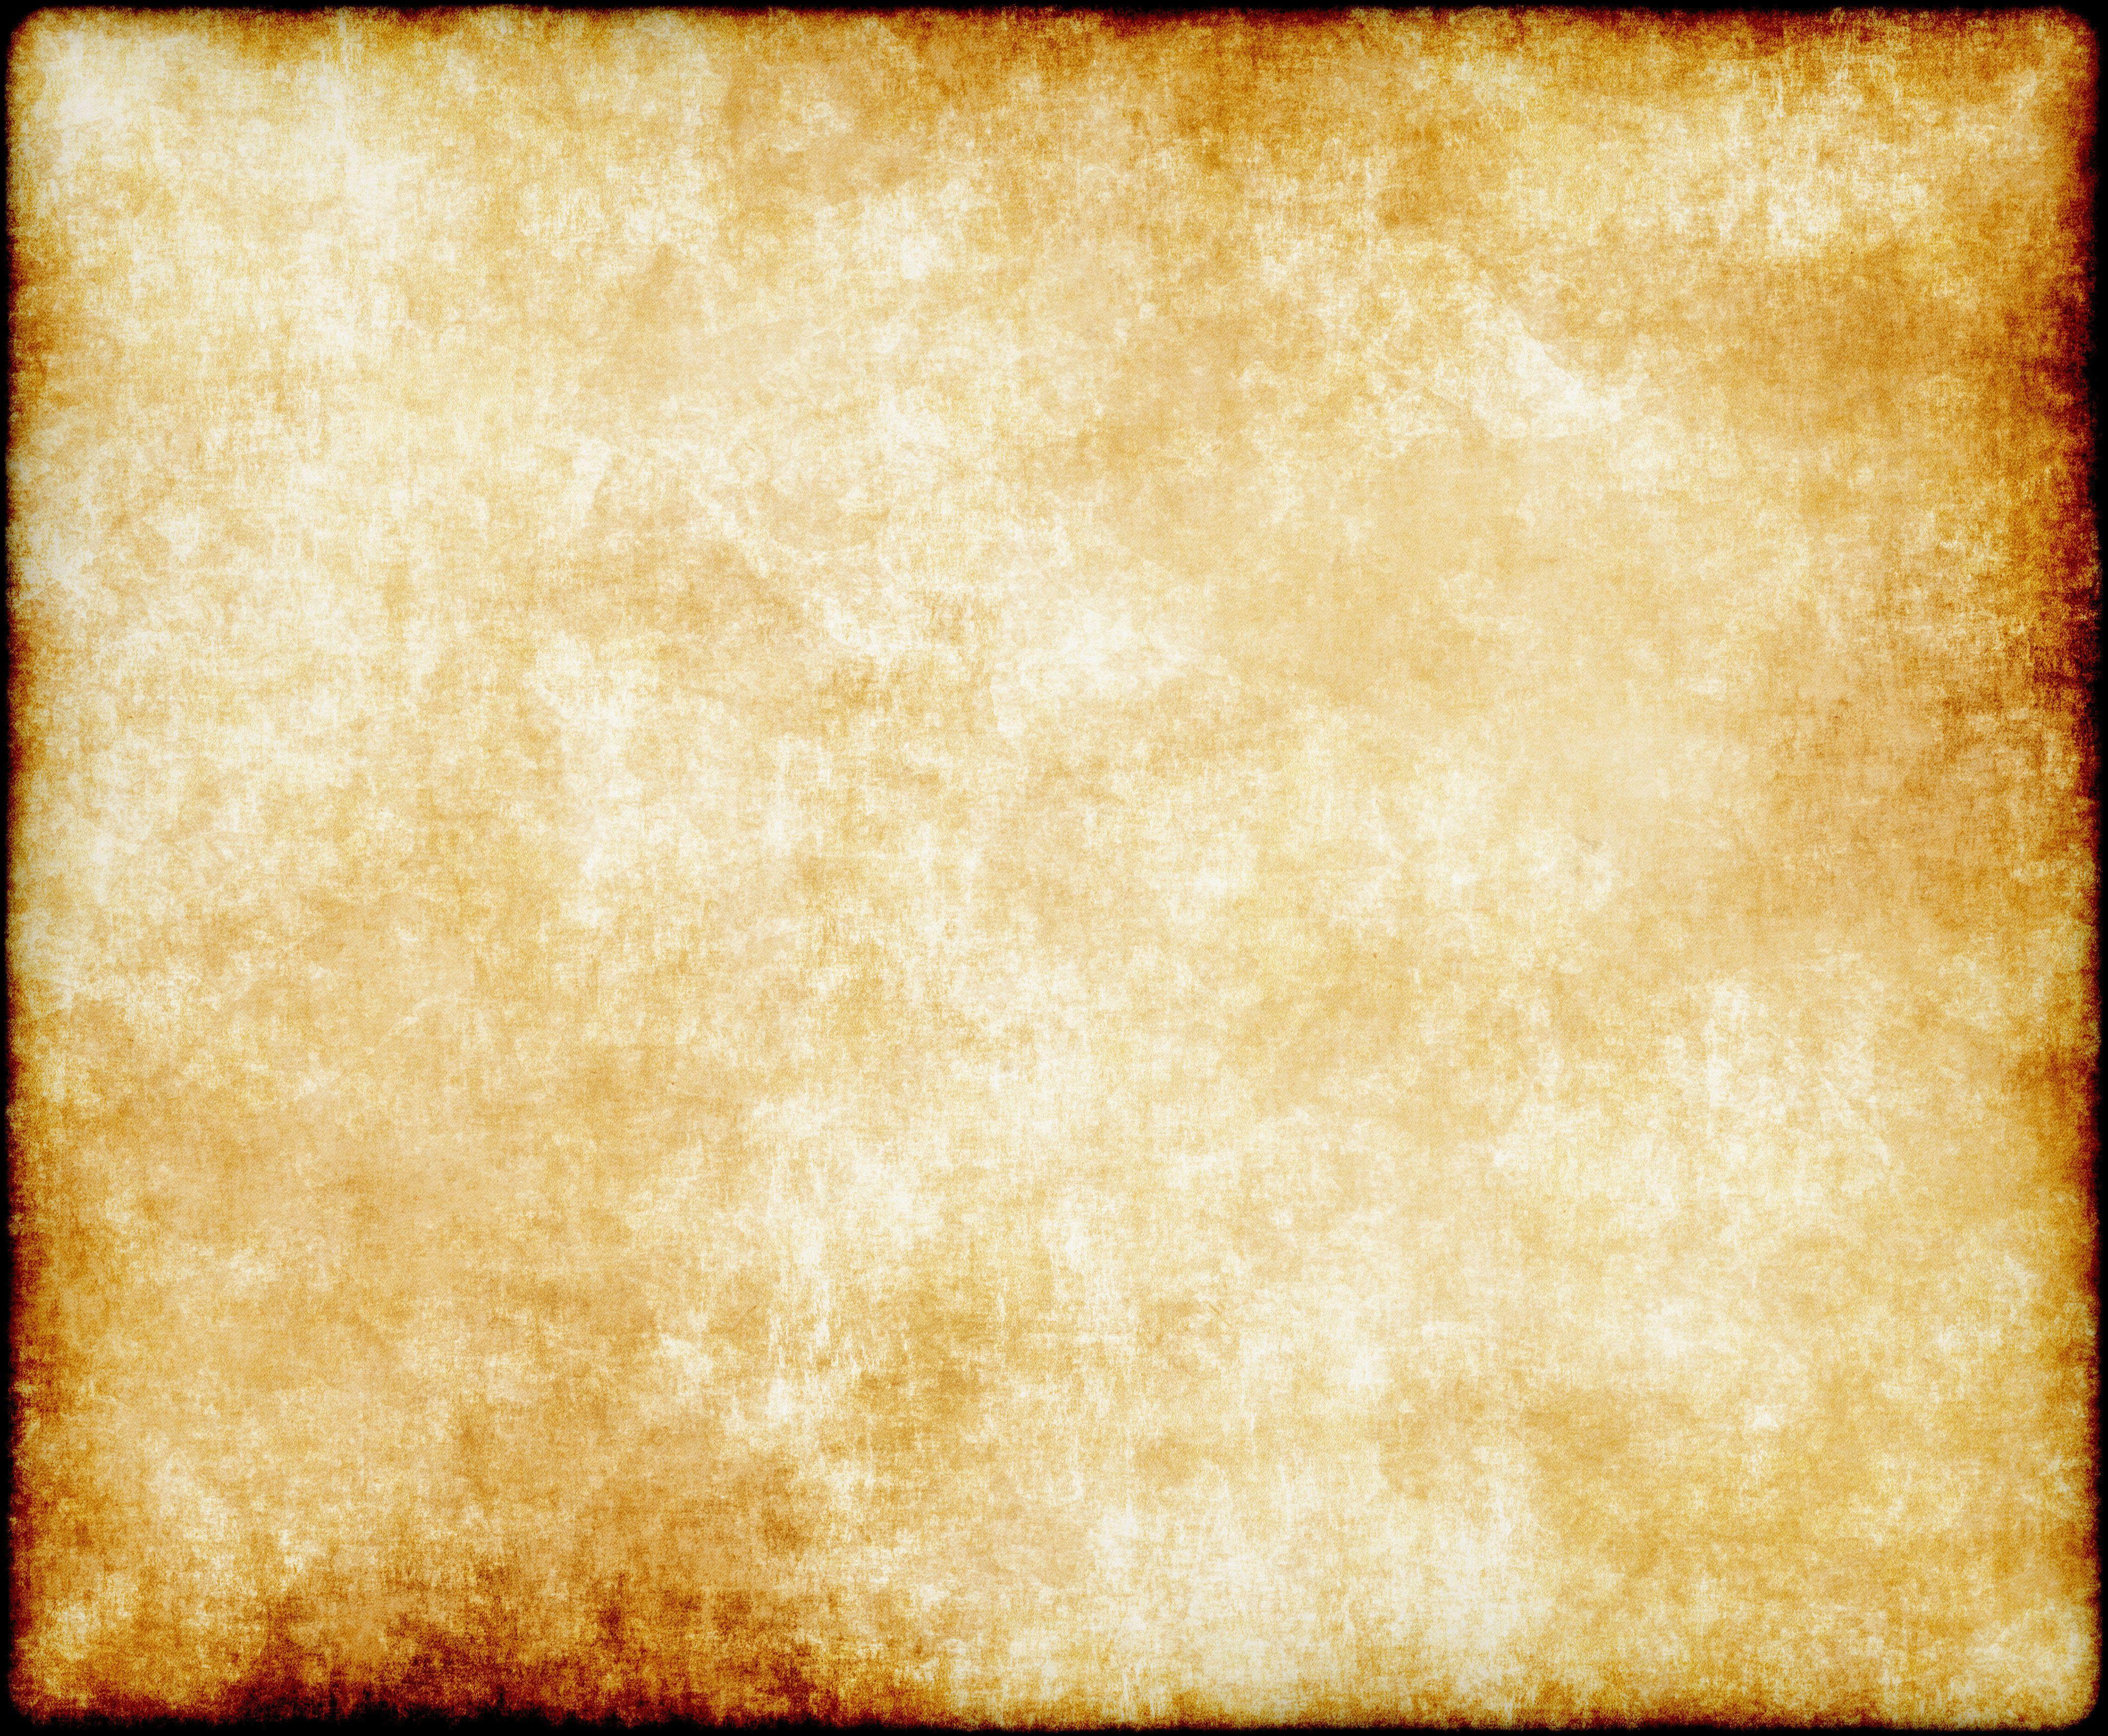 an old and worn out parchment paper background texture. Art Project